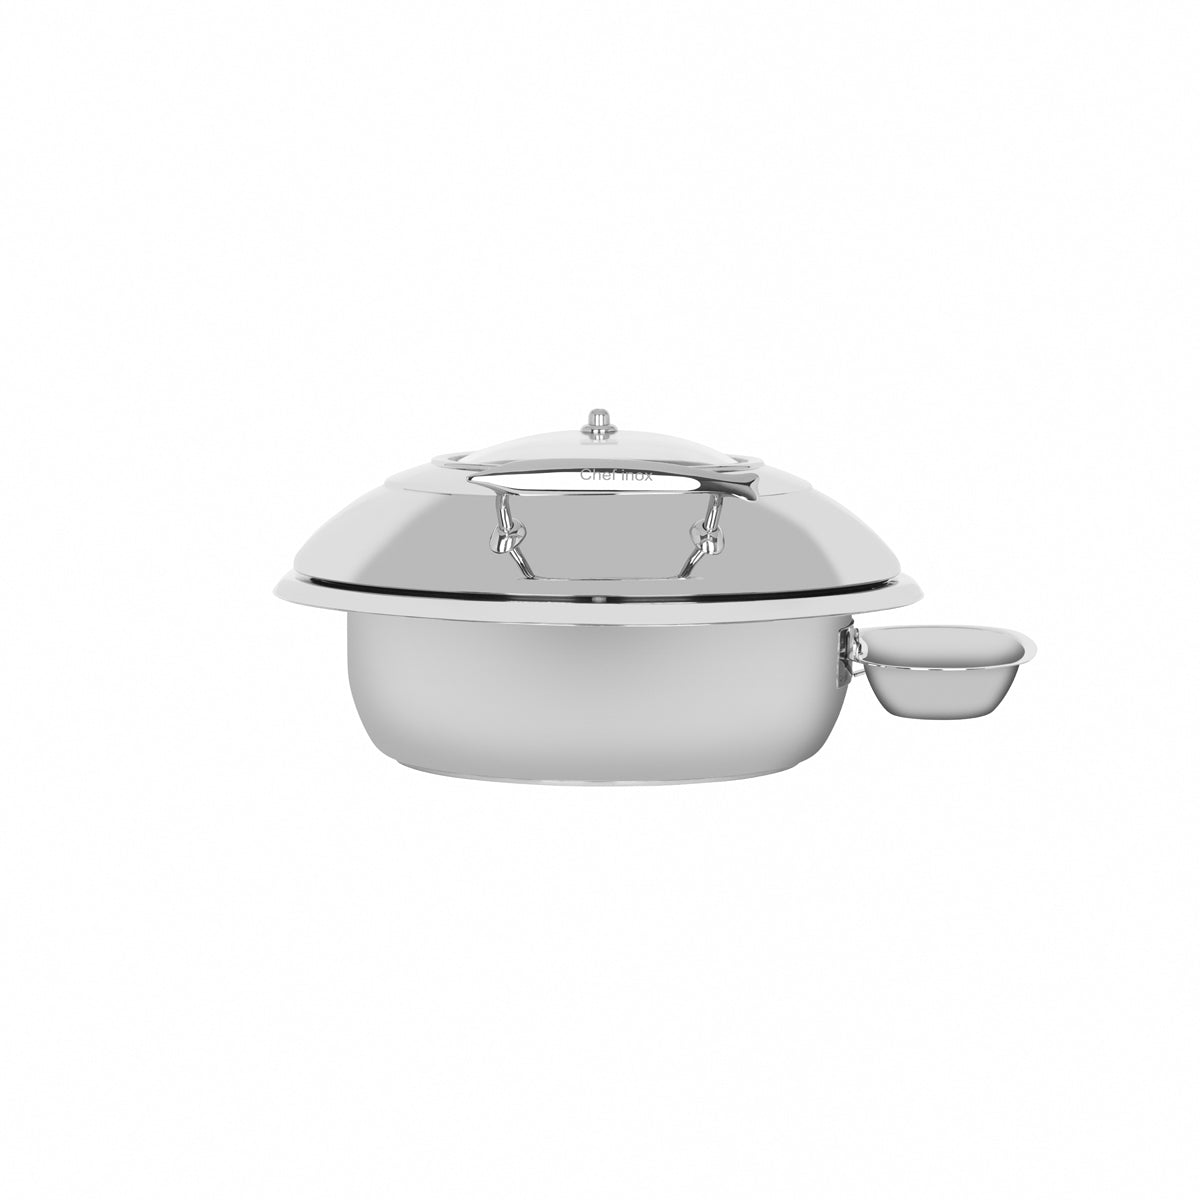 54915 Chef Inox Delux Chafer Round 18/8 Stainless Steel Small with Glass Lid Tomkin Australia Hospitality Supplies